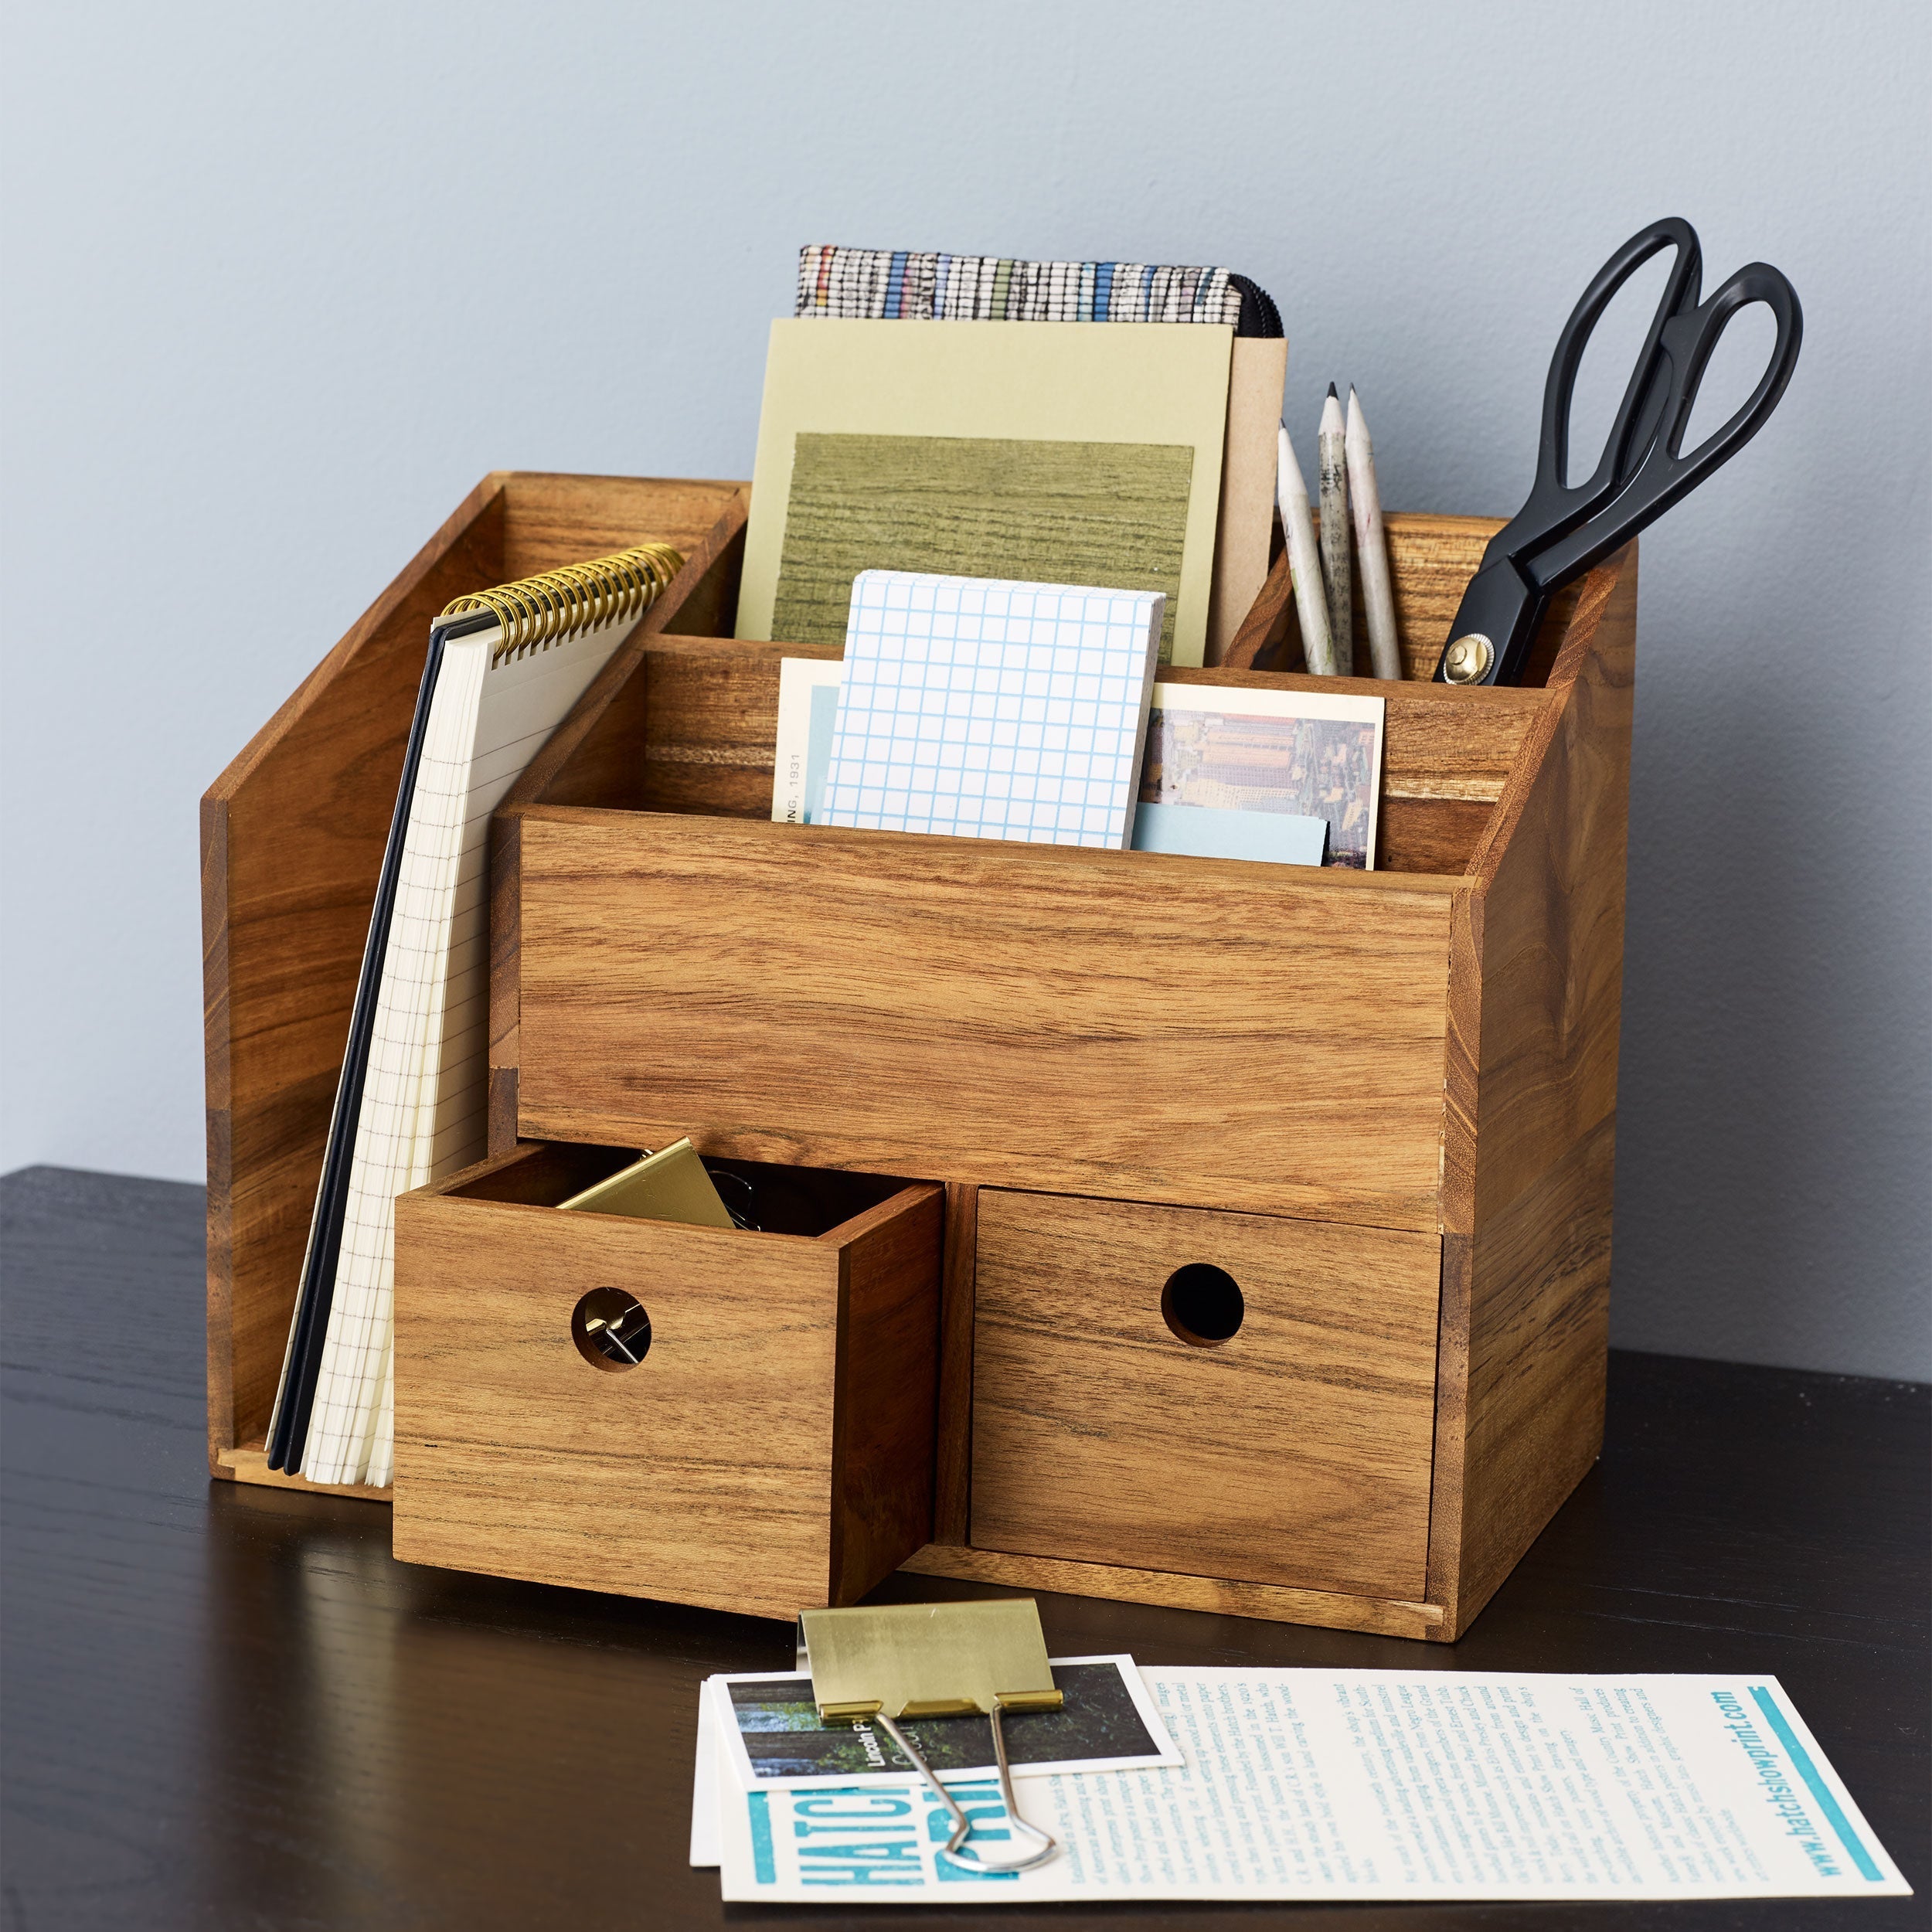 Takara Teak Organizer   | Image 4 | From the Takara Collection | Masterfully constructed with solid teak for long lasting use | This organizer is sustainably sourced | Available in clear color | texxture home